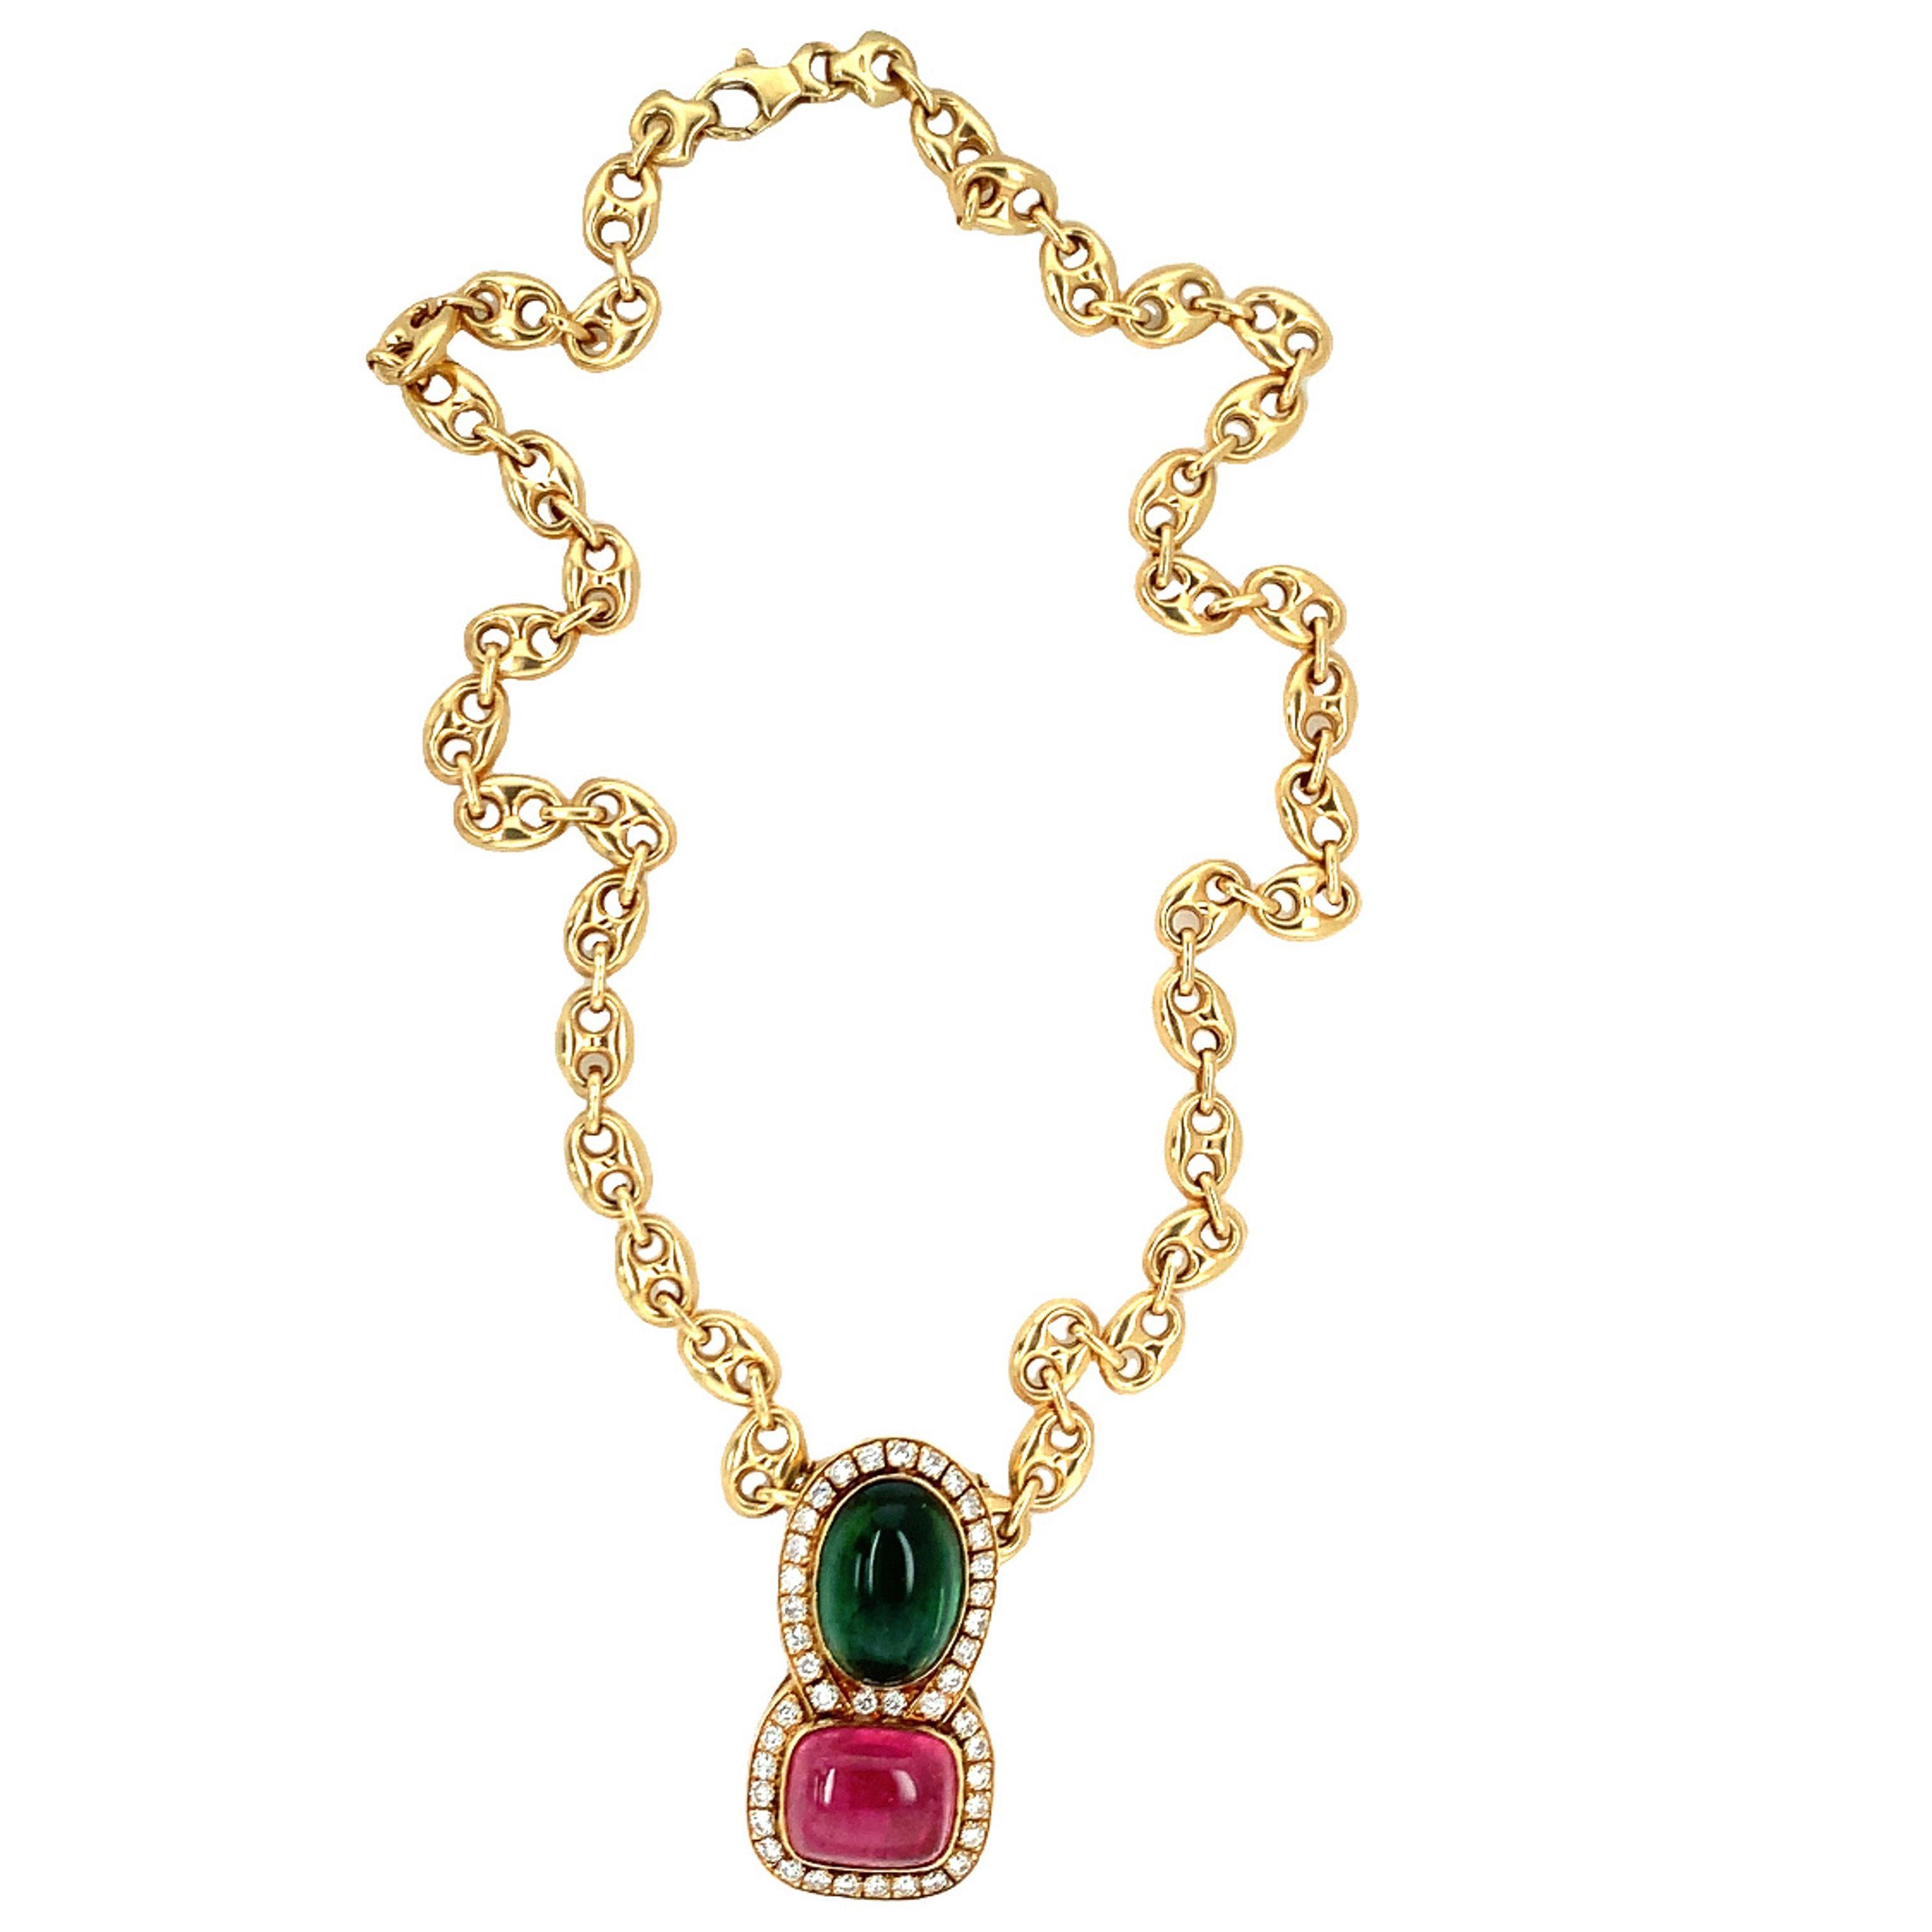 One stacked pink and green tourmaline and diamond 18K yellow gold pendant featuring one rectangular cabochon pink tourmaline weighing 12 ct. and one oval cabochon green tourmaline weighing 15 ct. Enhanced by 41 round brilliant cut diamonds weighing